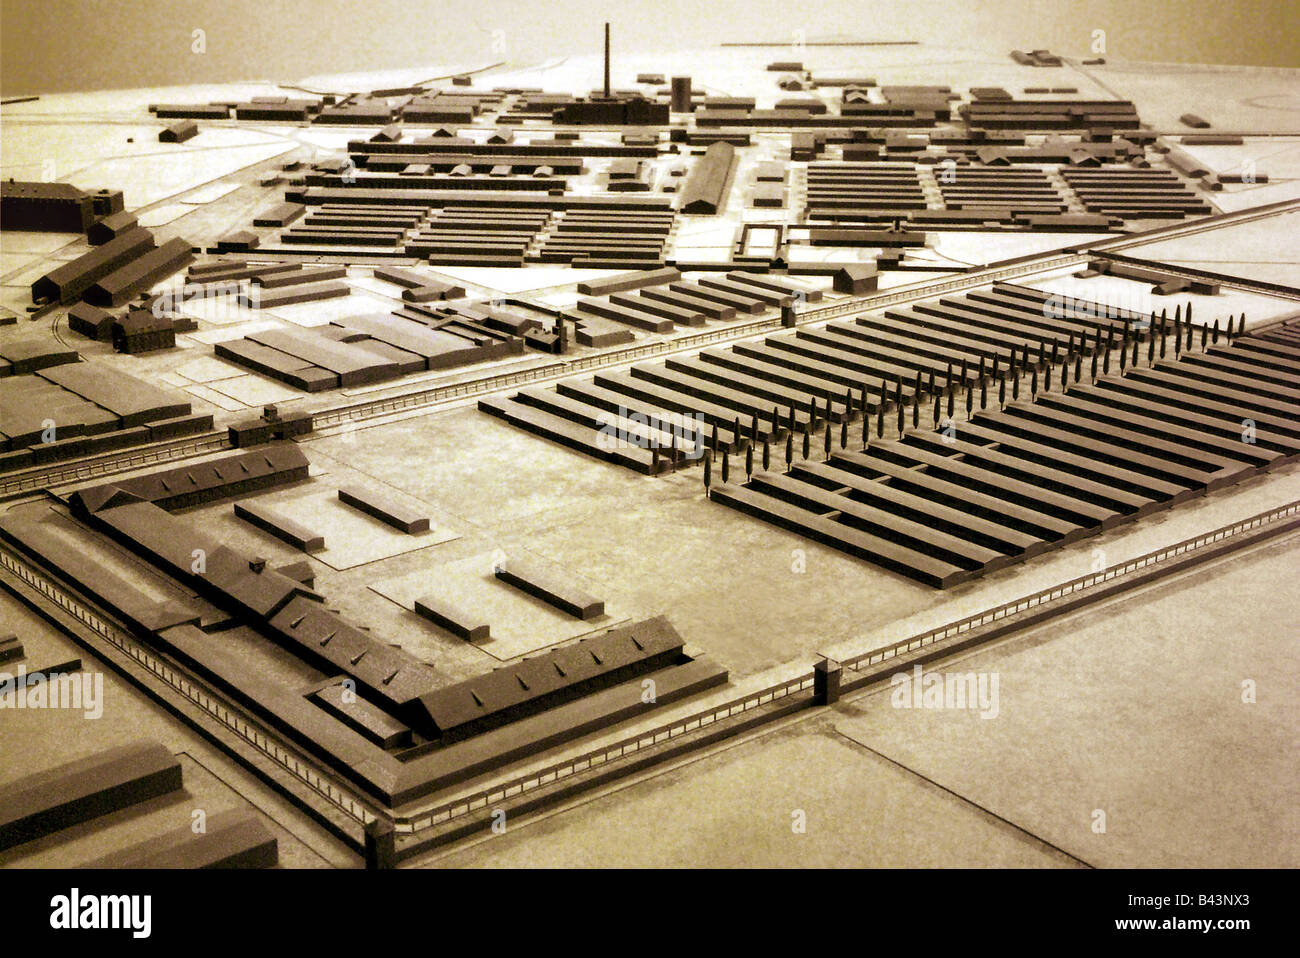 geography / travel, Nazi Germany, Bavaria, Dachau, miniature of the concentration camp Dachau in April 1945 shortly before the liberation, detail, prisoner camp with fence and watch-towers, accommodation huts for prisoners, sick person area huts, camp street with poplars, building for labour, so called jour house, the central gate to the camp, the fenced camp is today a memorial square, symbol, terrorism, nazism, nazi, ns, holocaust, persecution of the Jews, third reich, watch tower, hut, further buildings, district heating plant, , Additional-Rights-Clearance-Info-Not-Available Stock Photo